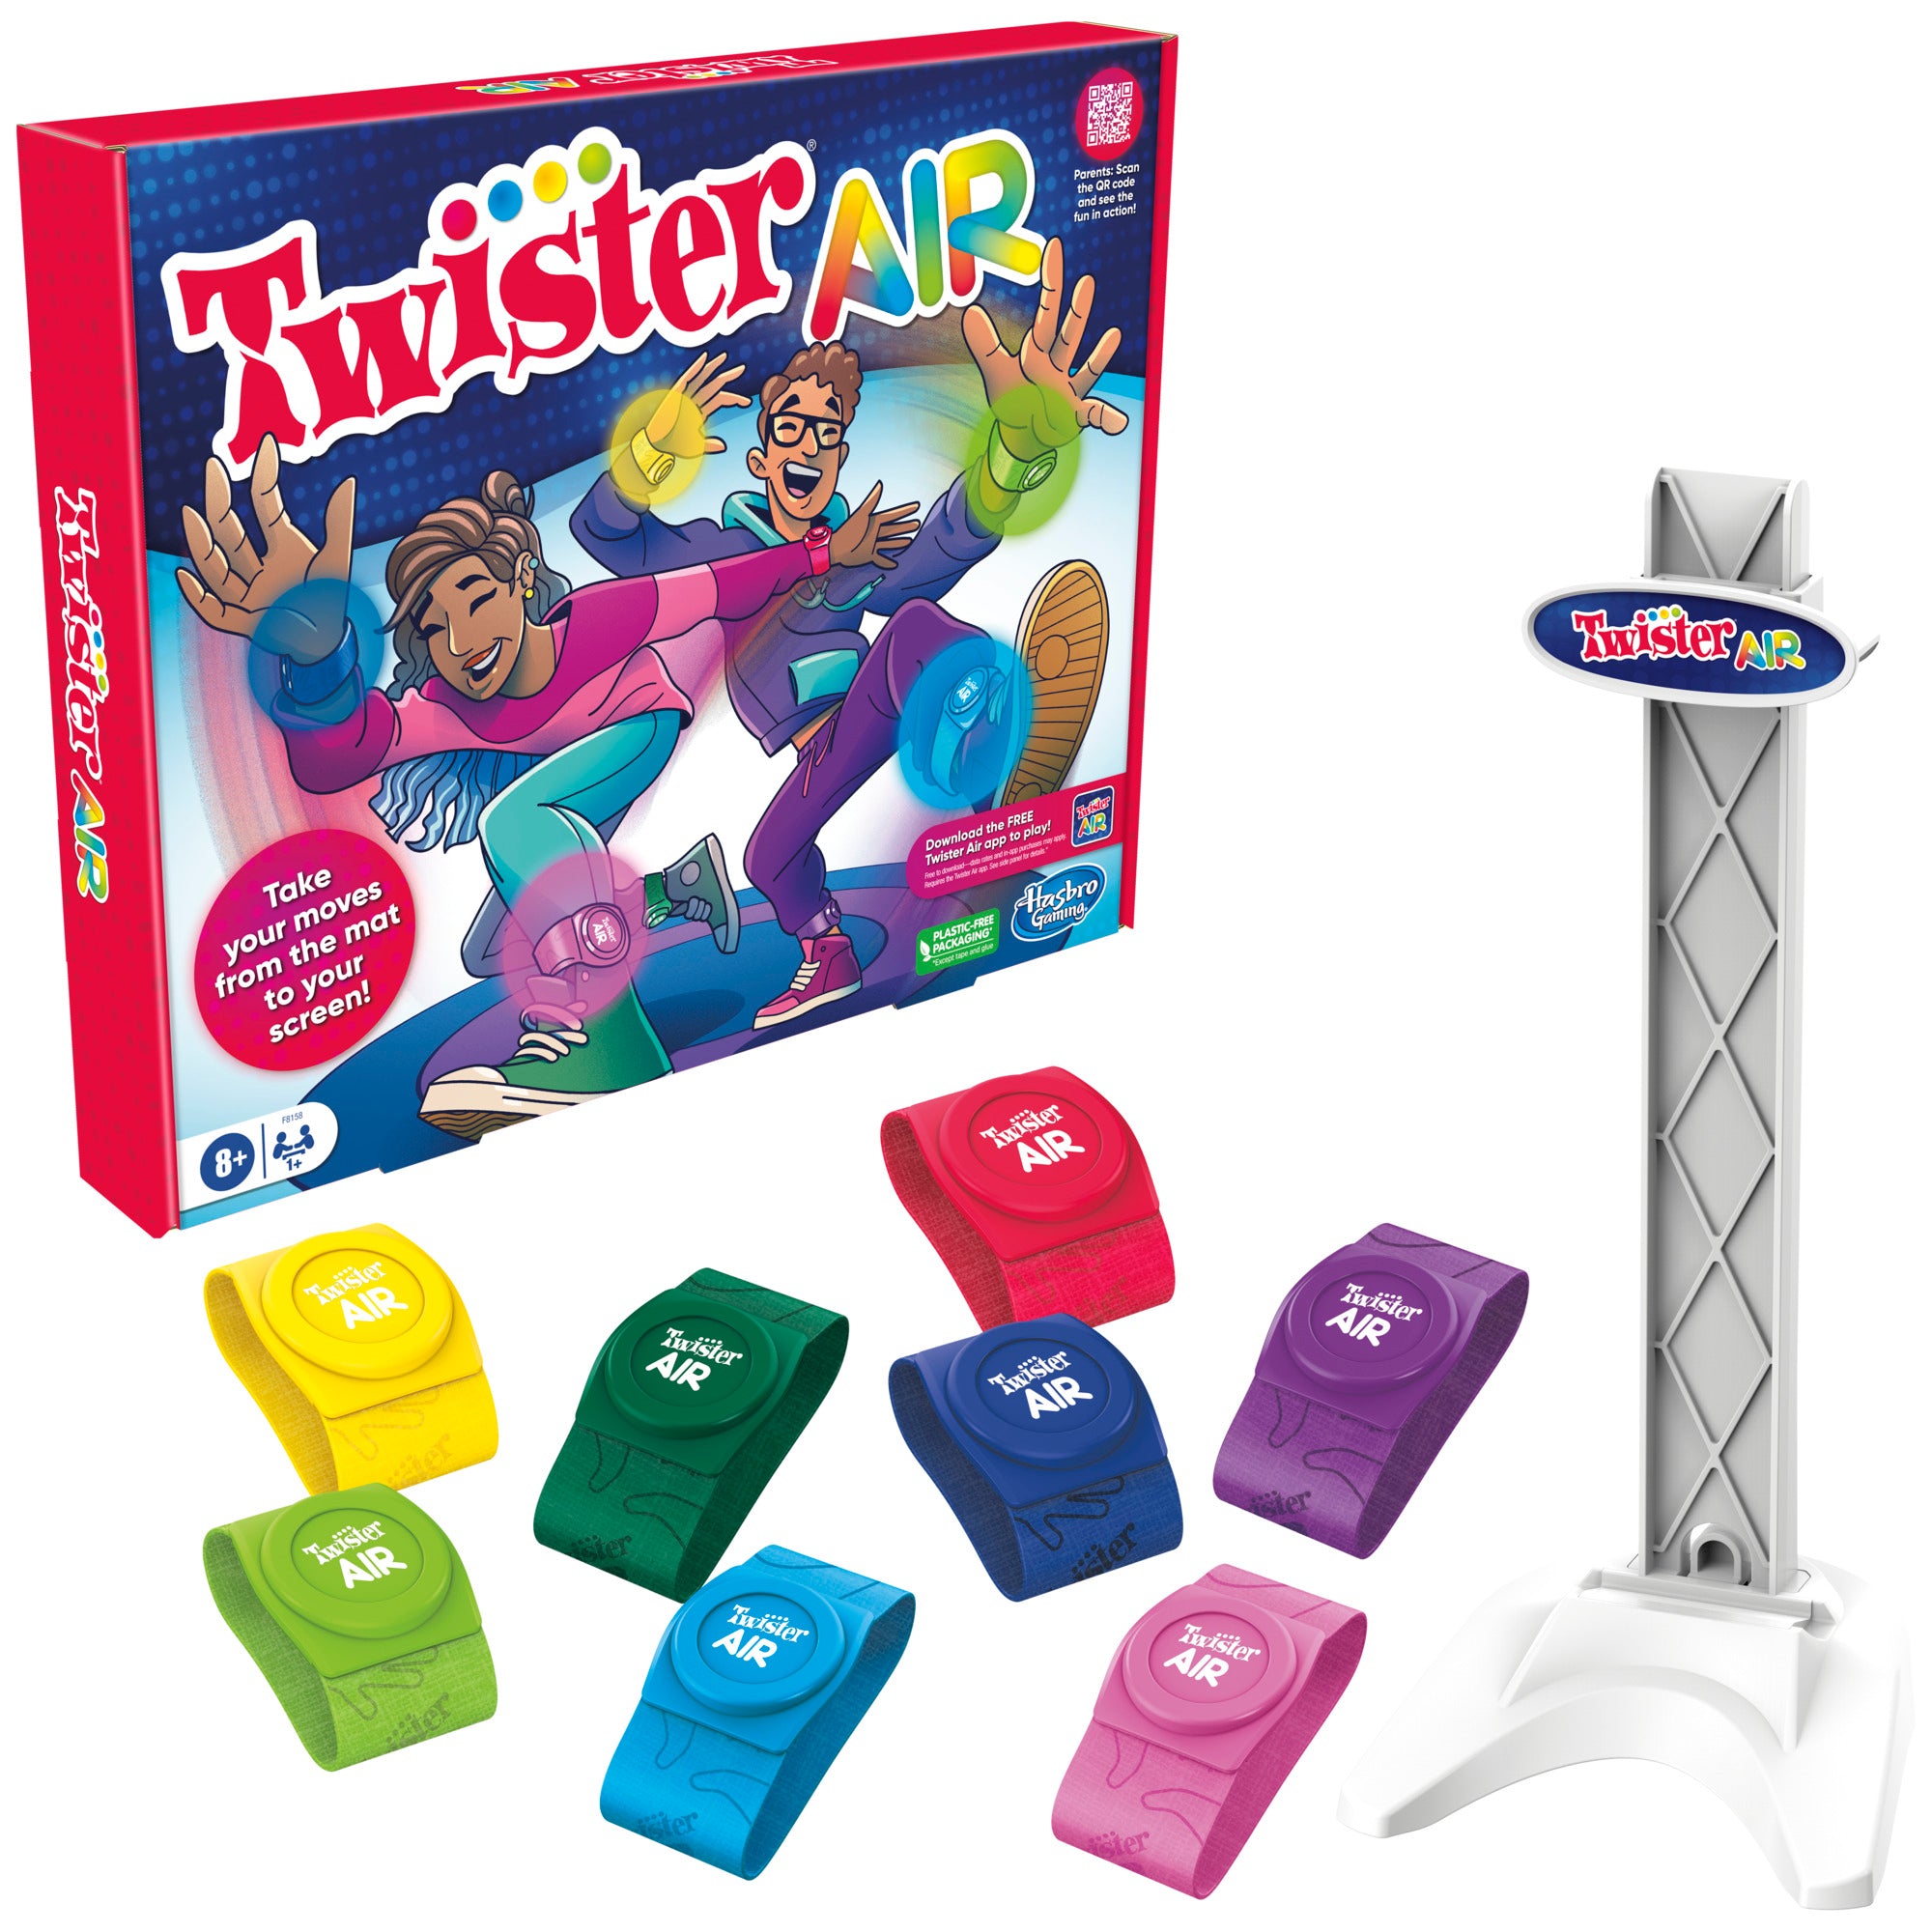 Hasbro Pulse on Instagram: Introducing Twister Air! Take moves from the  mat to the screen with this app-enabled game, an exciting augmented reality  TWIST on the Twister game. Players reach, clap, swipe